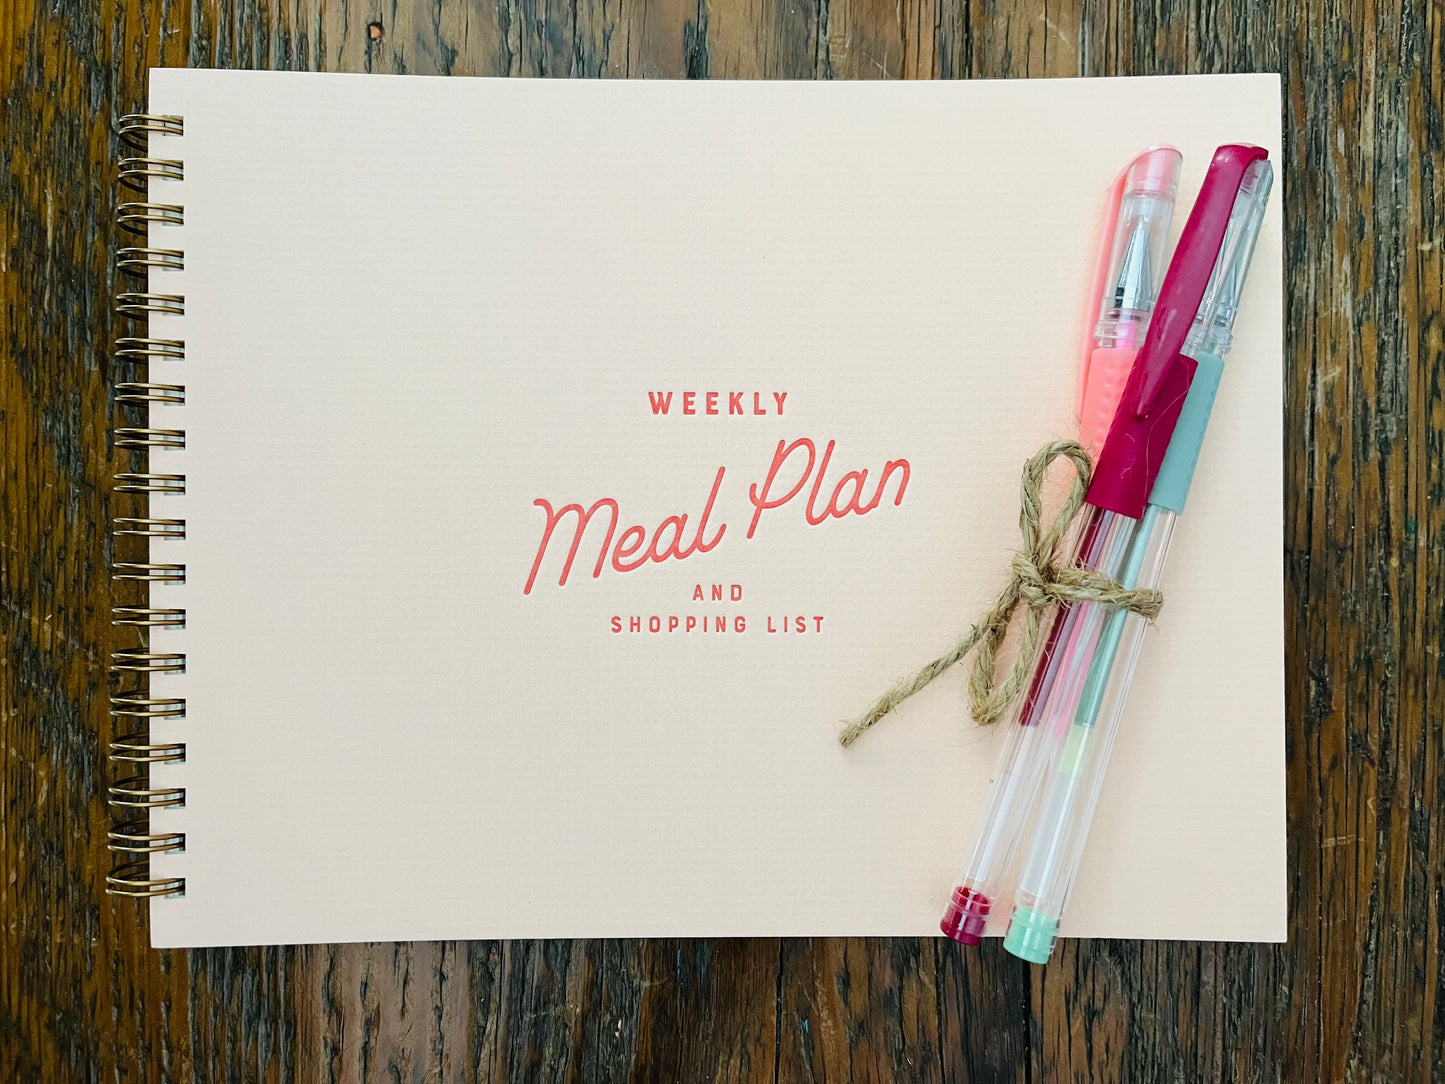 Retro Weekly Meal Planner Stationary Set